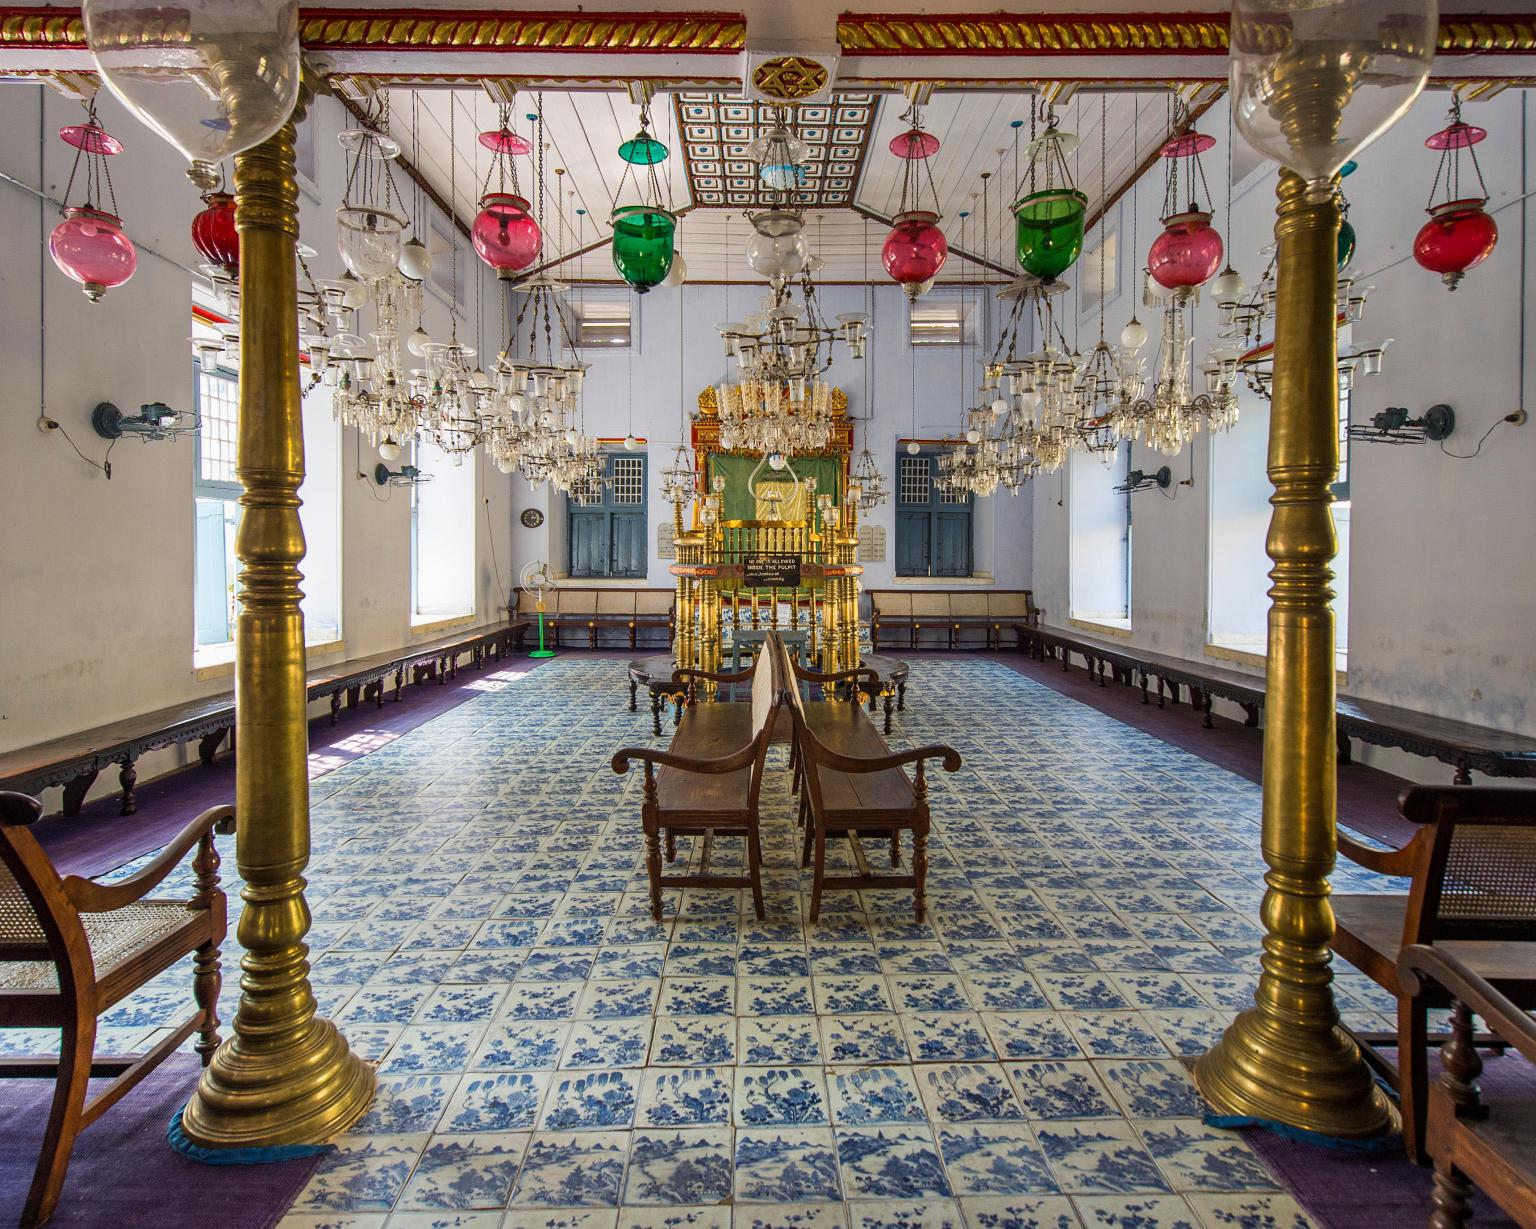 Photograph of room with floor tiles, two gold columns, and glass chandeliers.